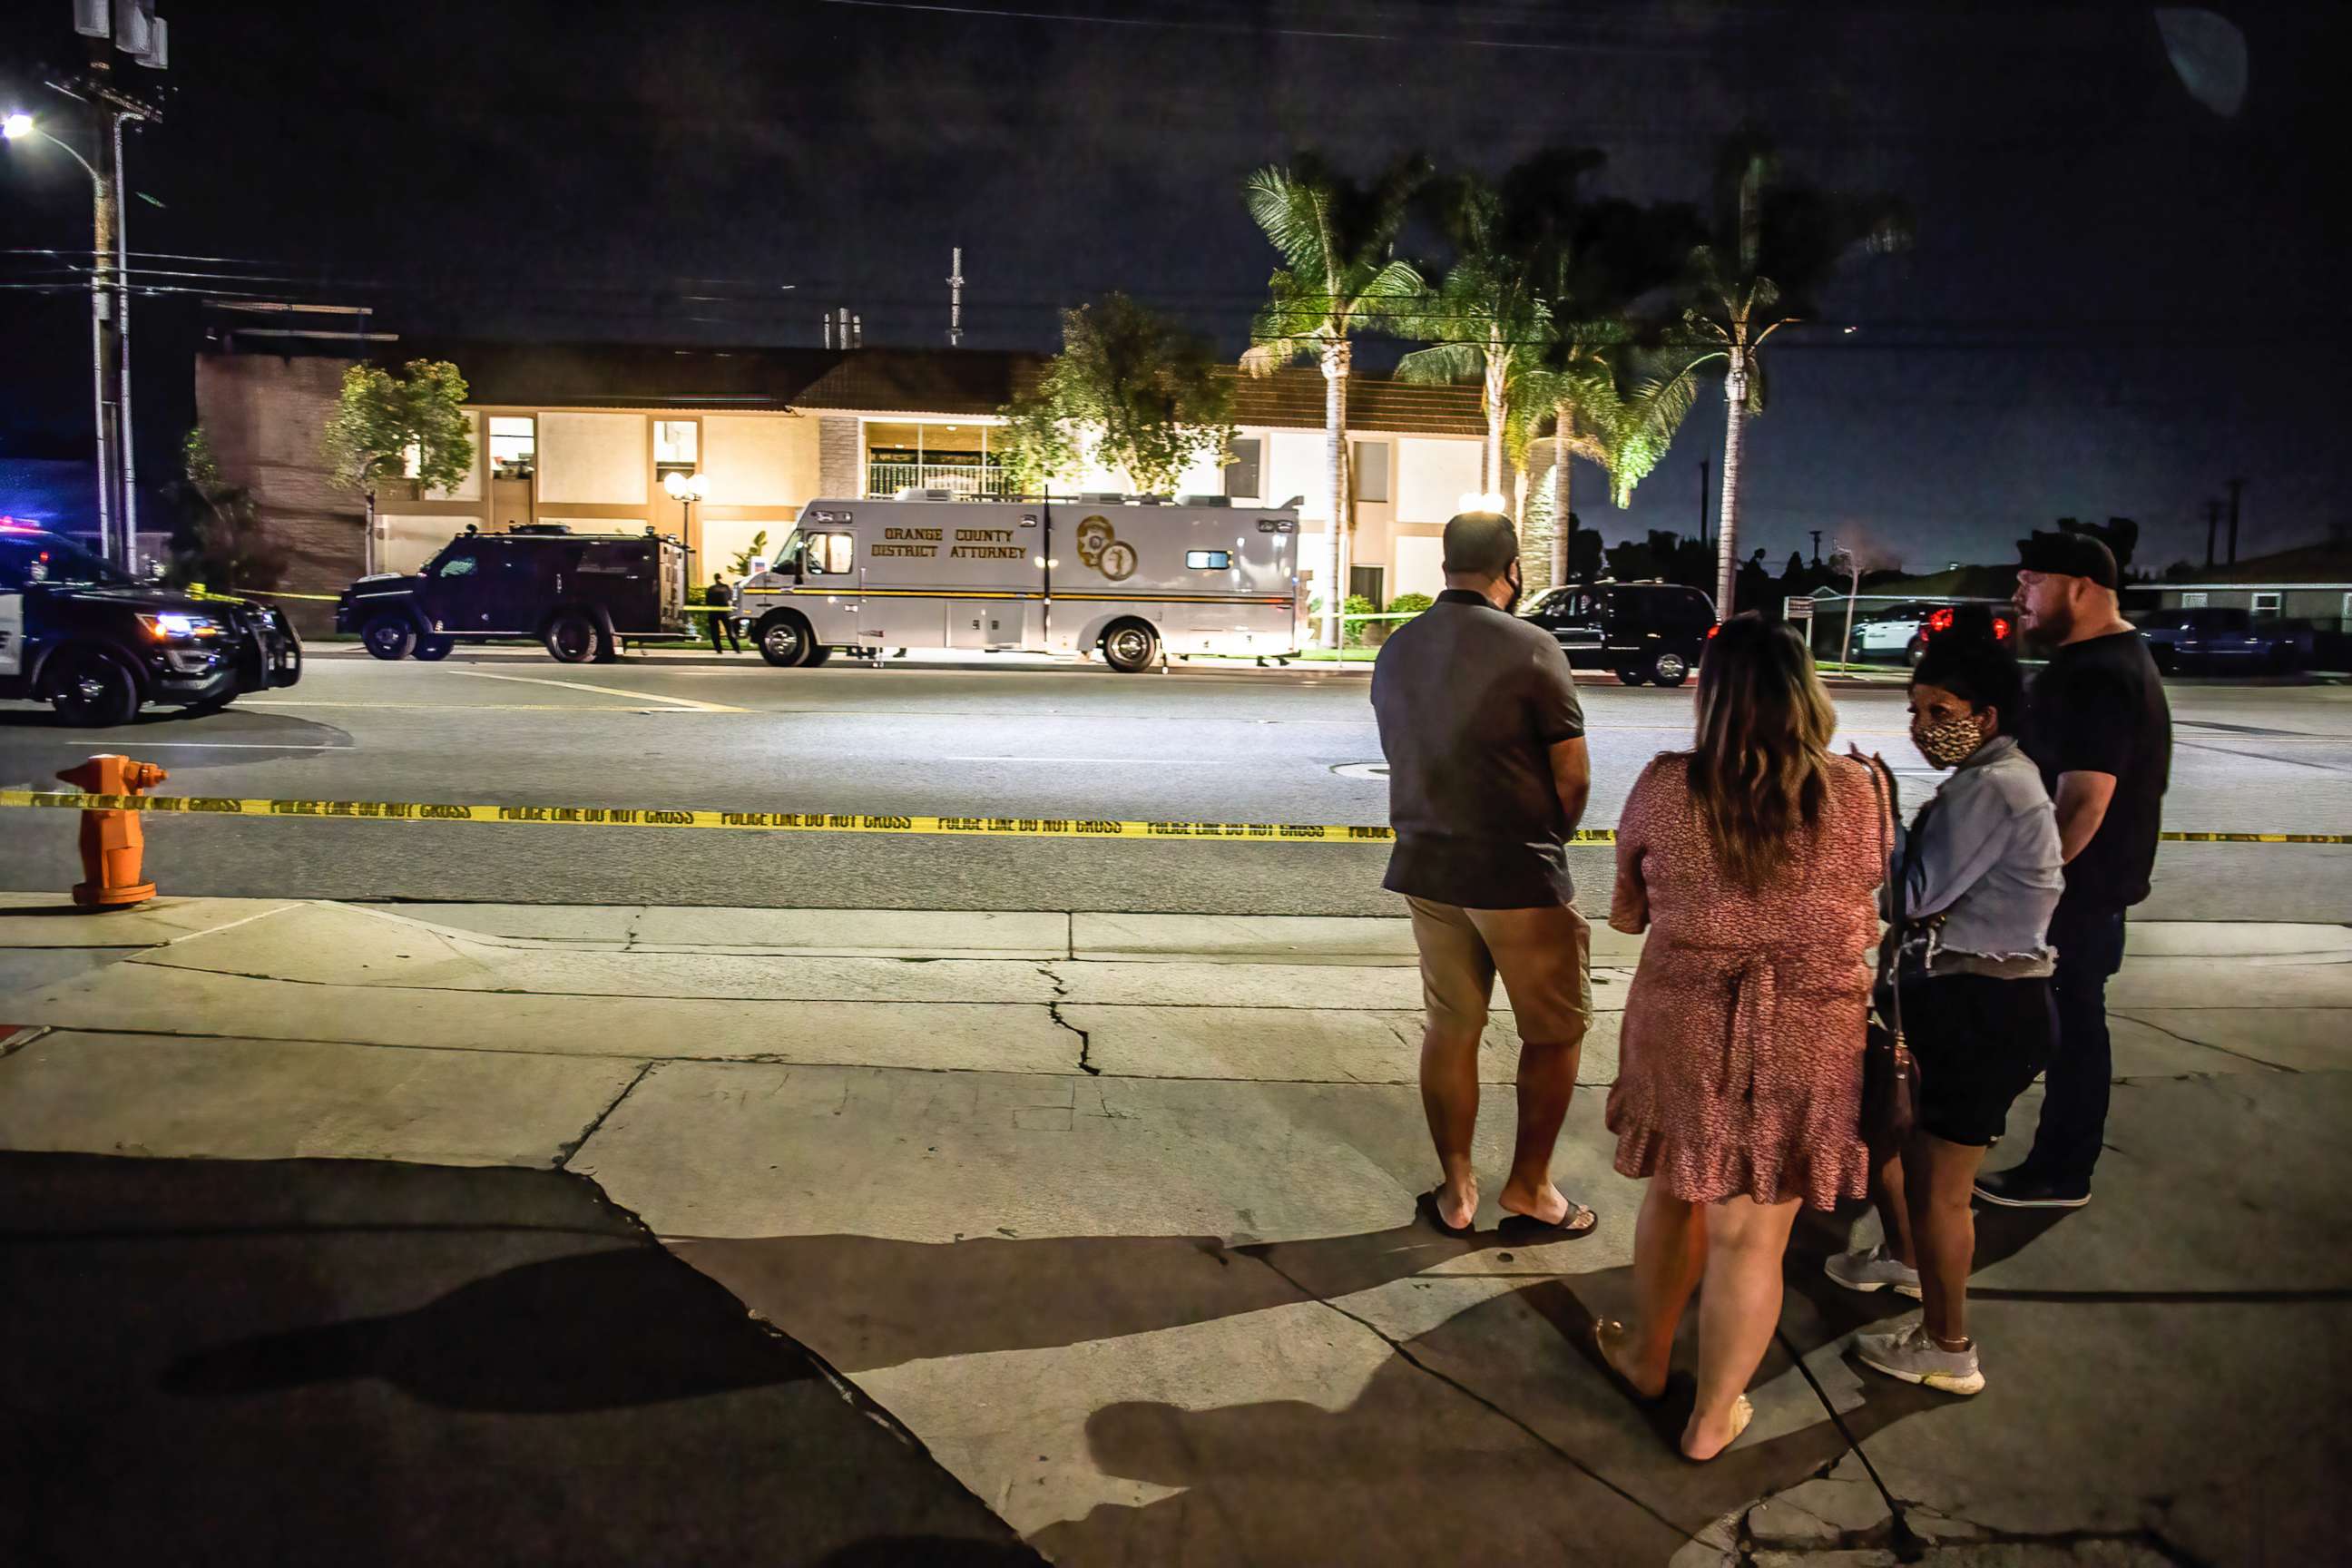 PHOTO: Locals stand and wait for updates across the street from the scene of the fatal shootings of four people, including a child, in Orange, Calif., March 31, 2021.